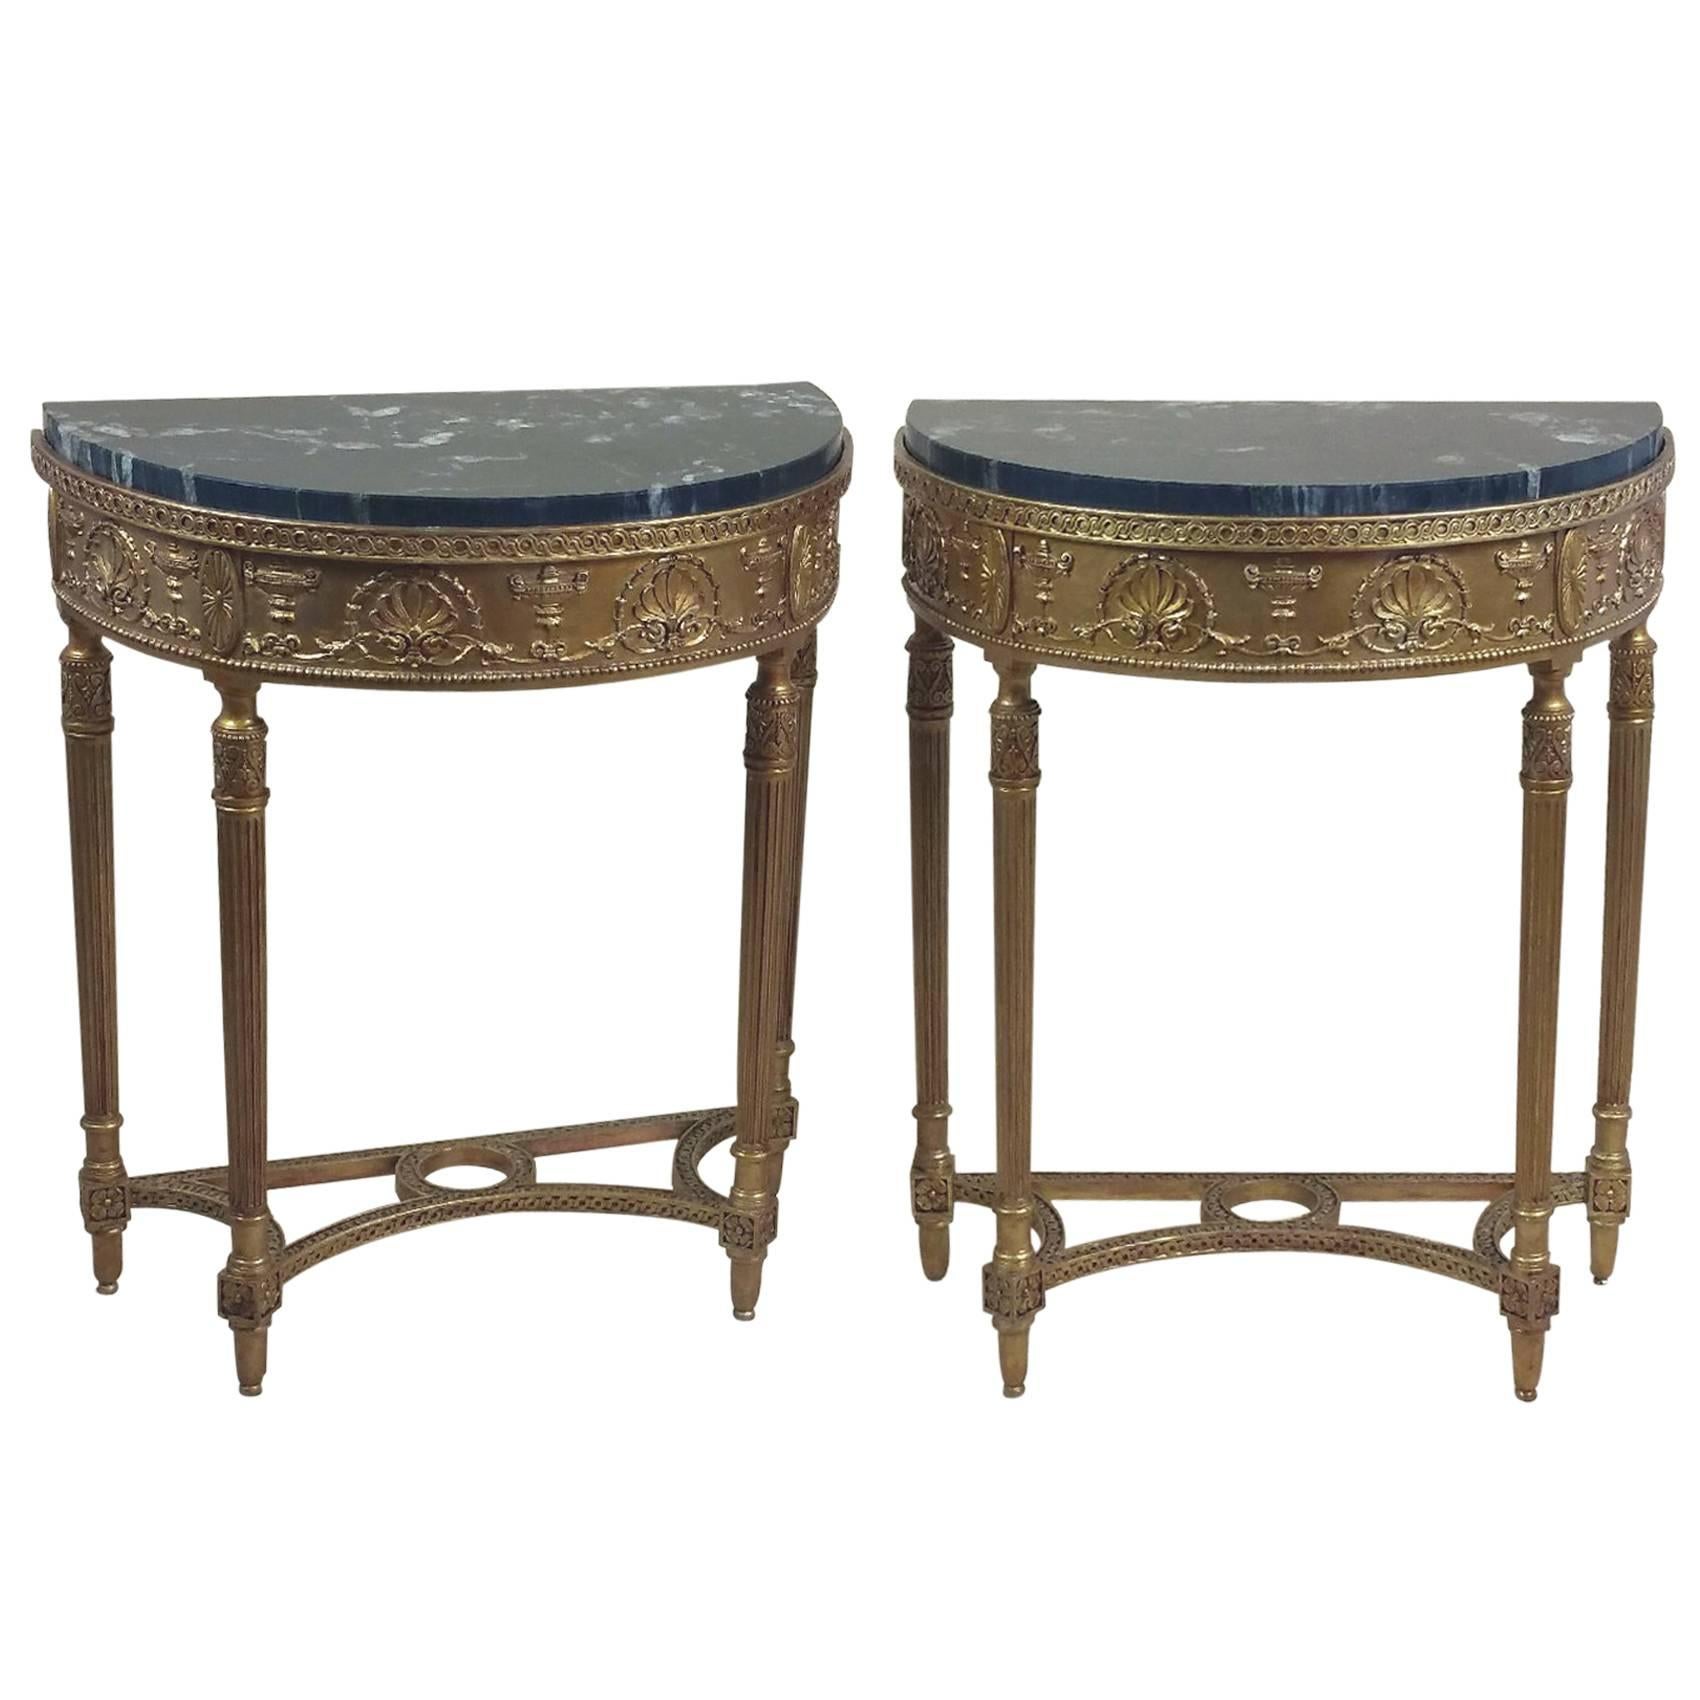 Pair of Demilune Gilt Console Tables